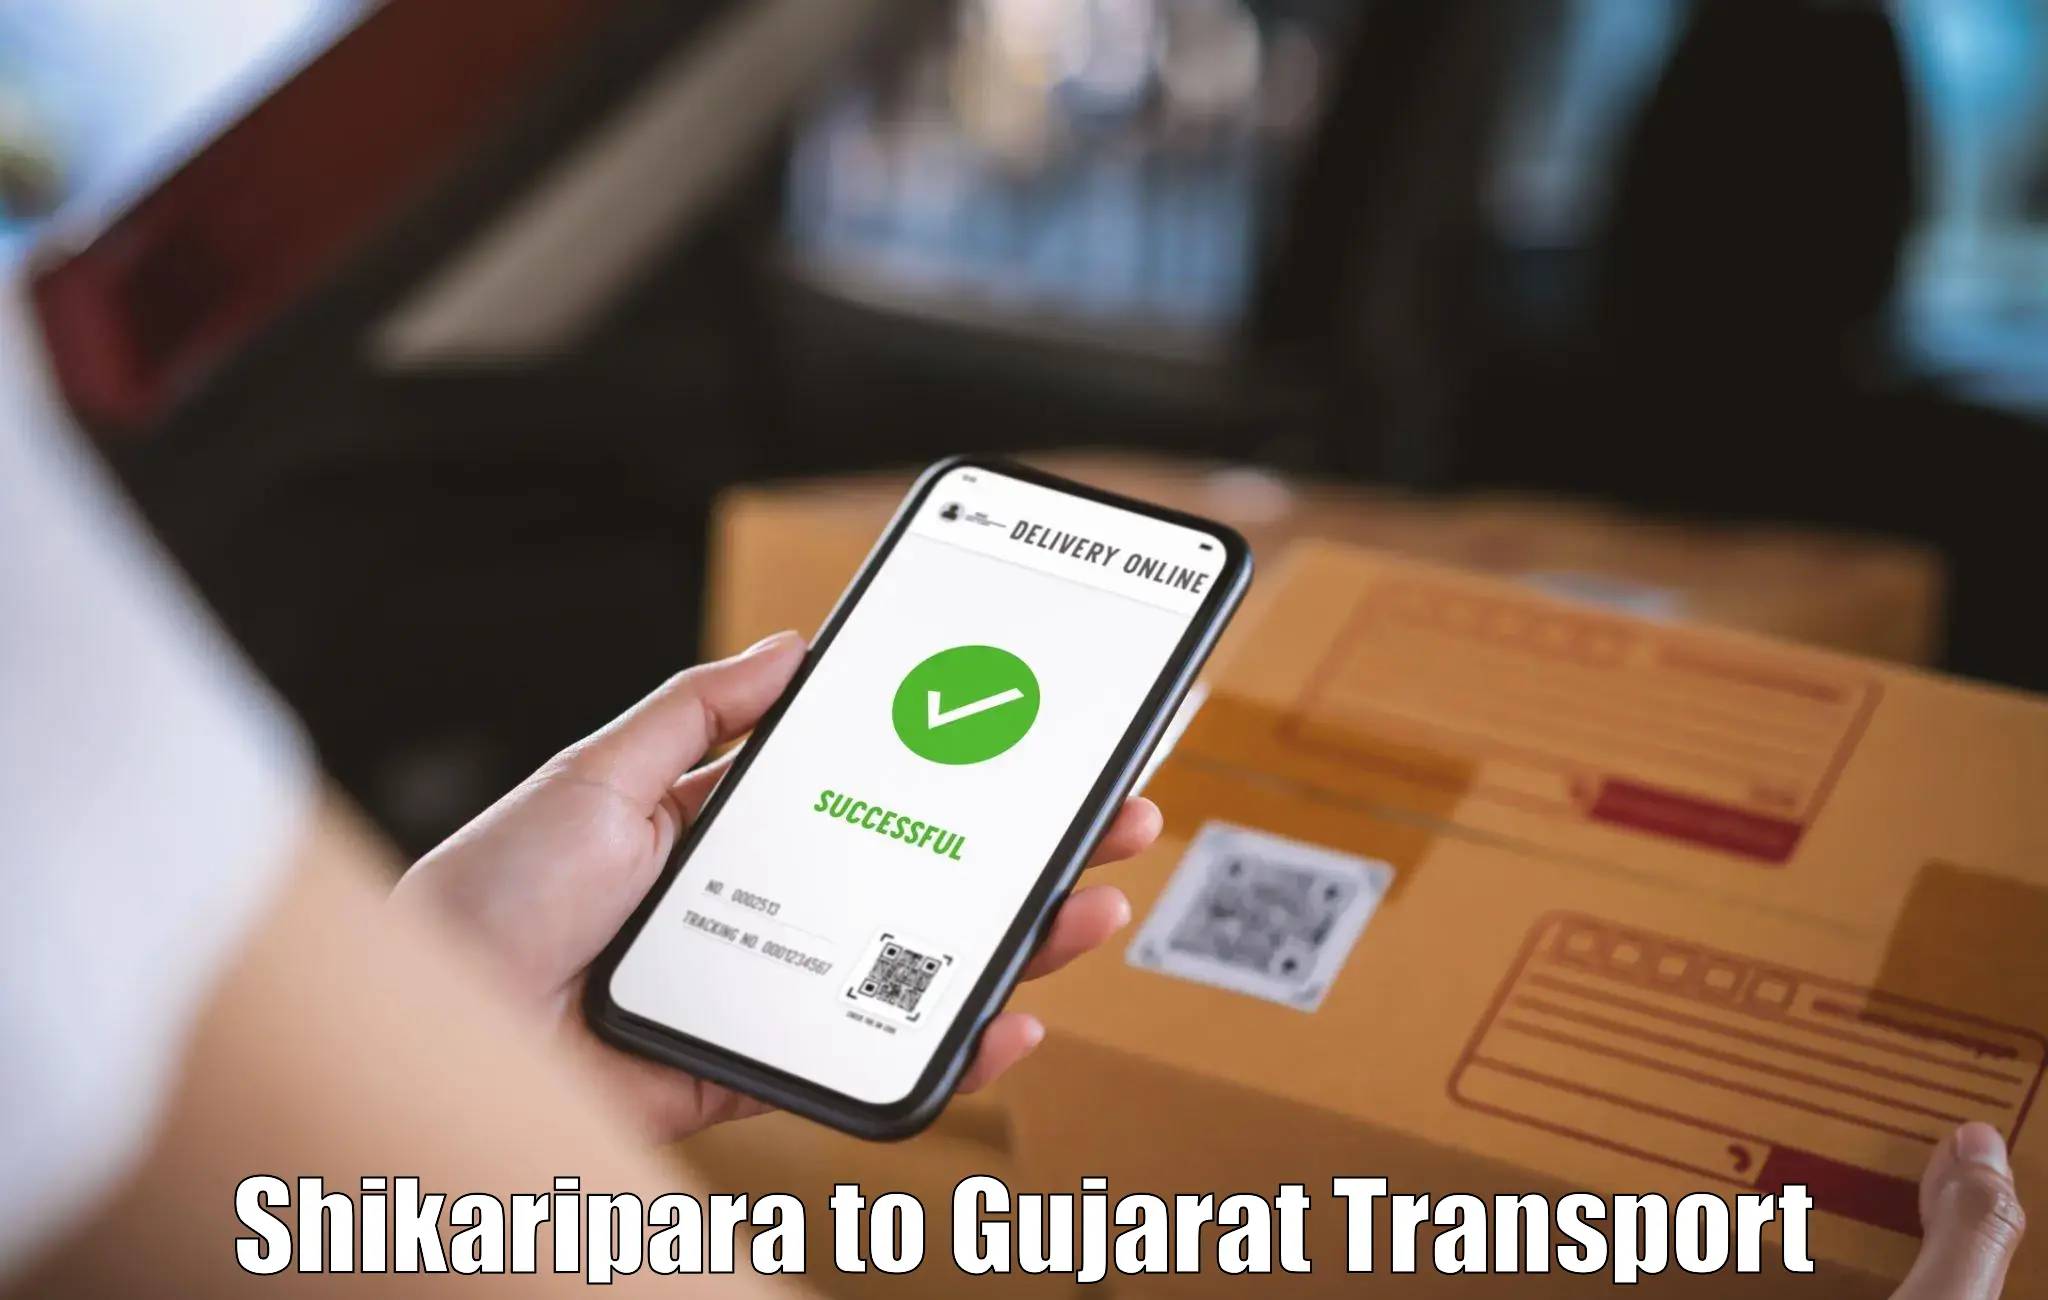 Package delivery services Shikaripara to Gujarat